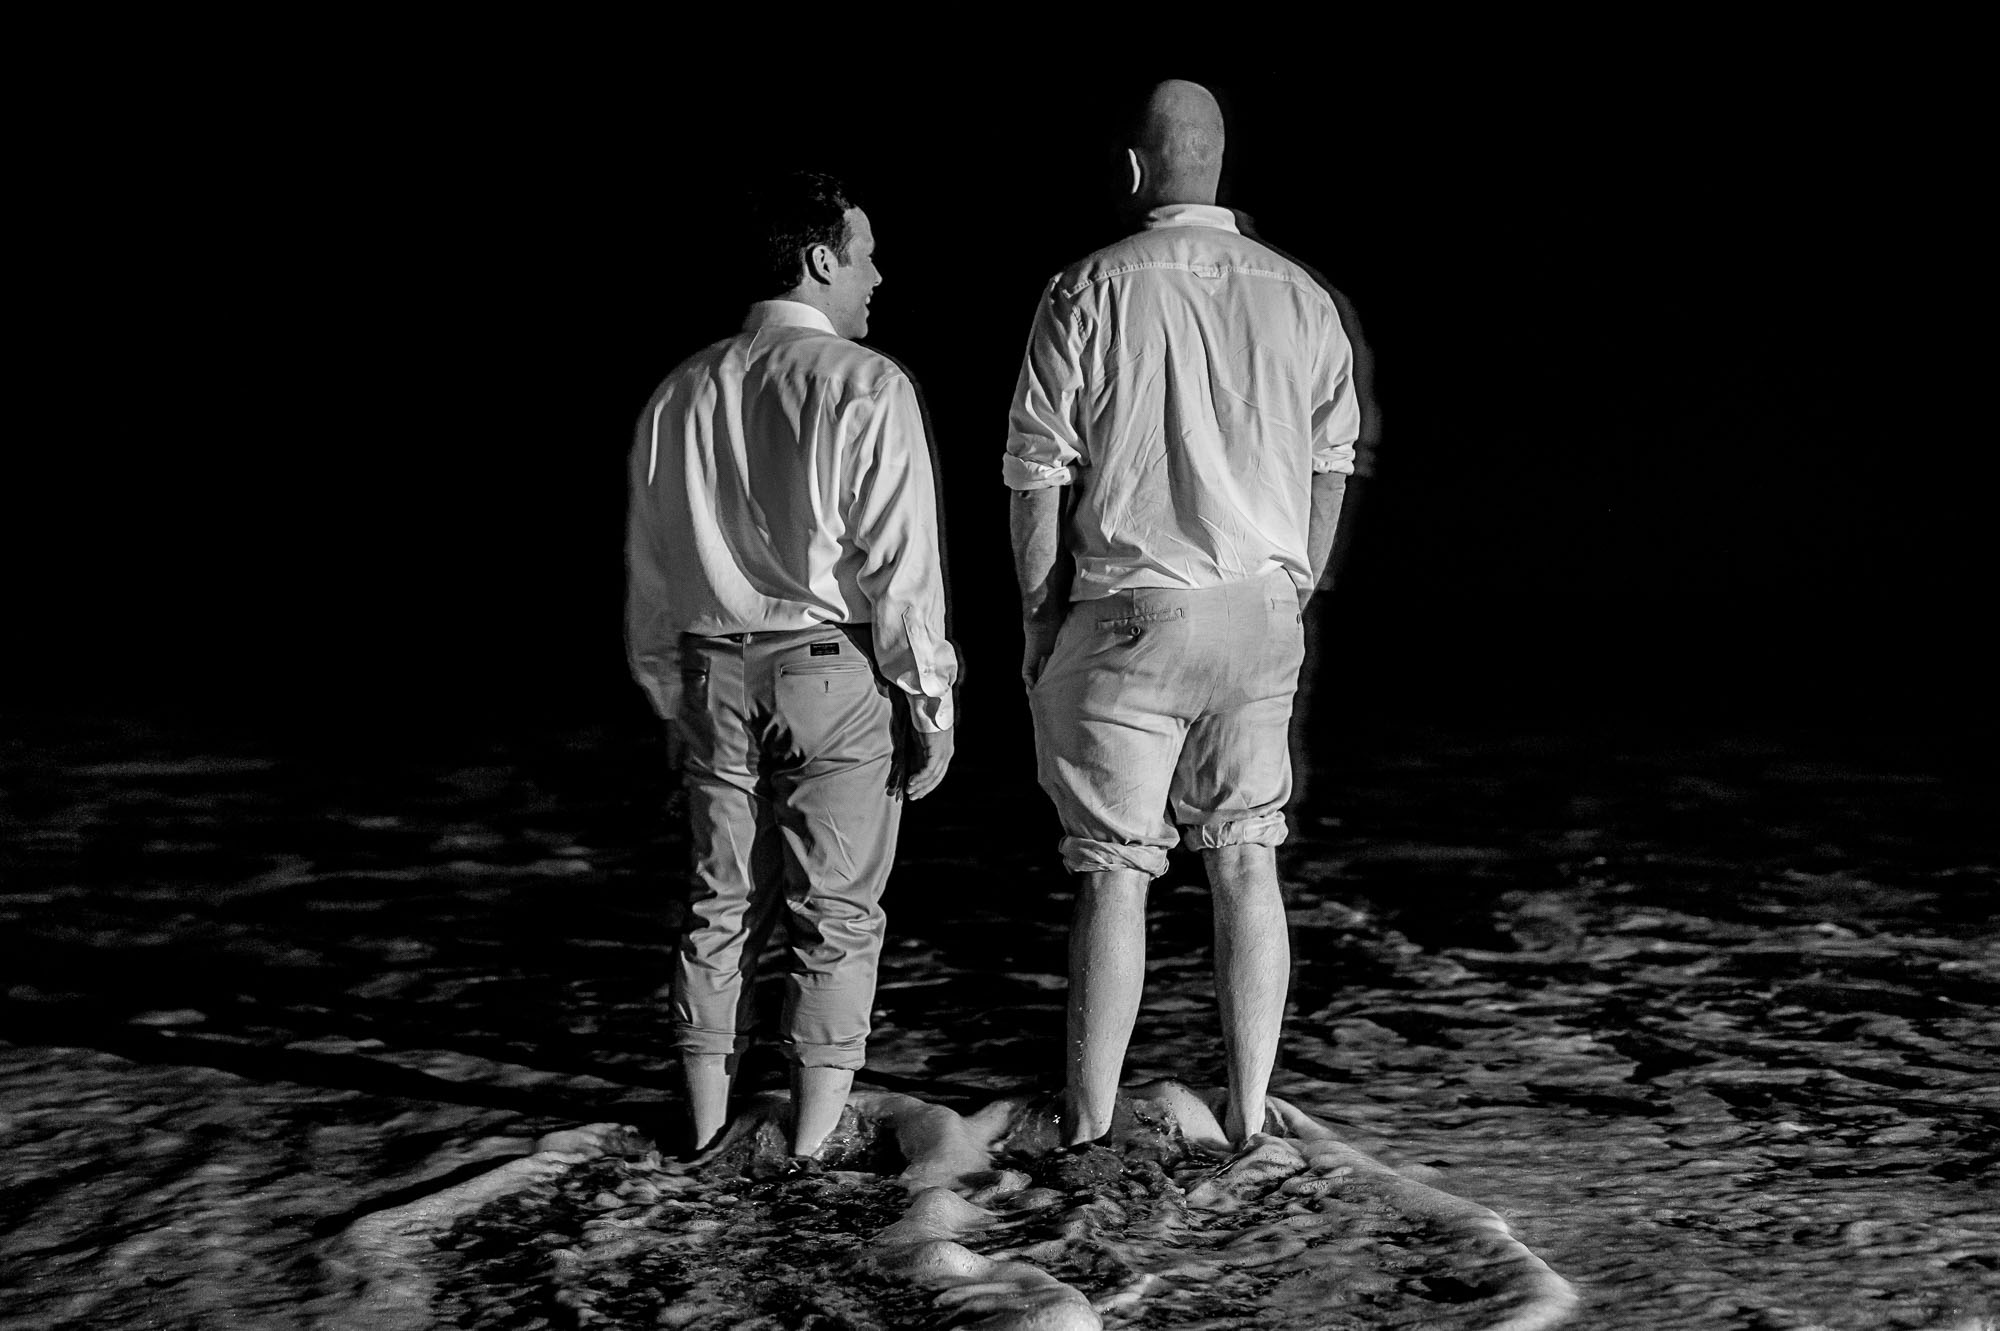 The groom and his friend enjoying a moment in the ocean